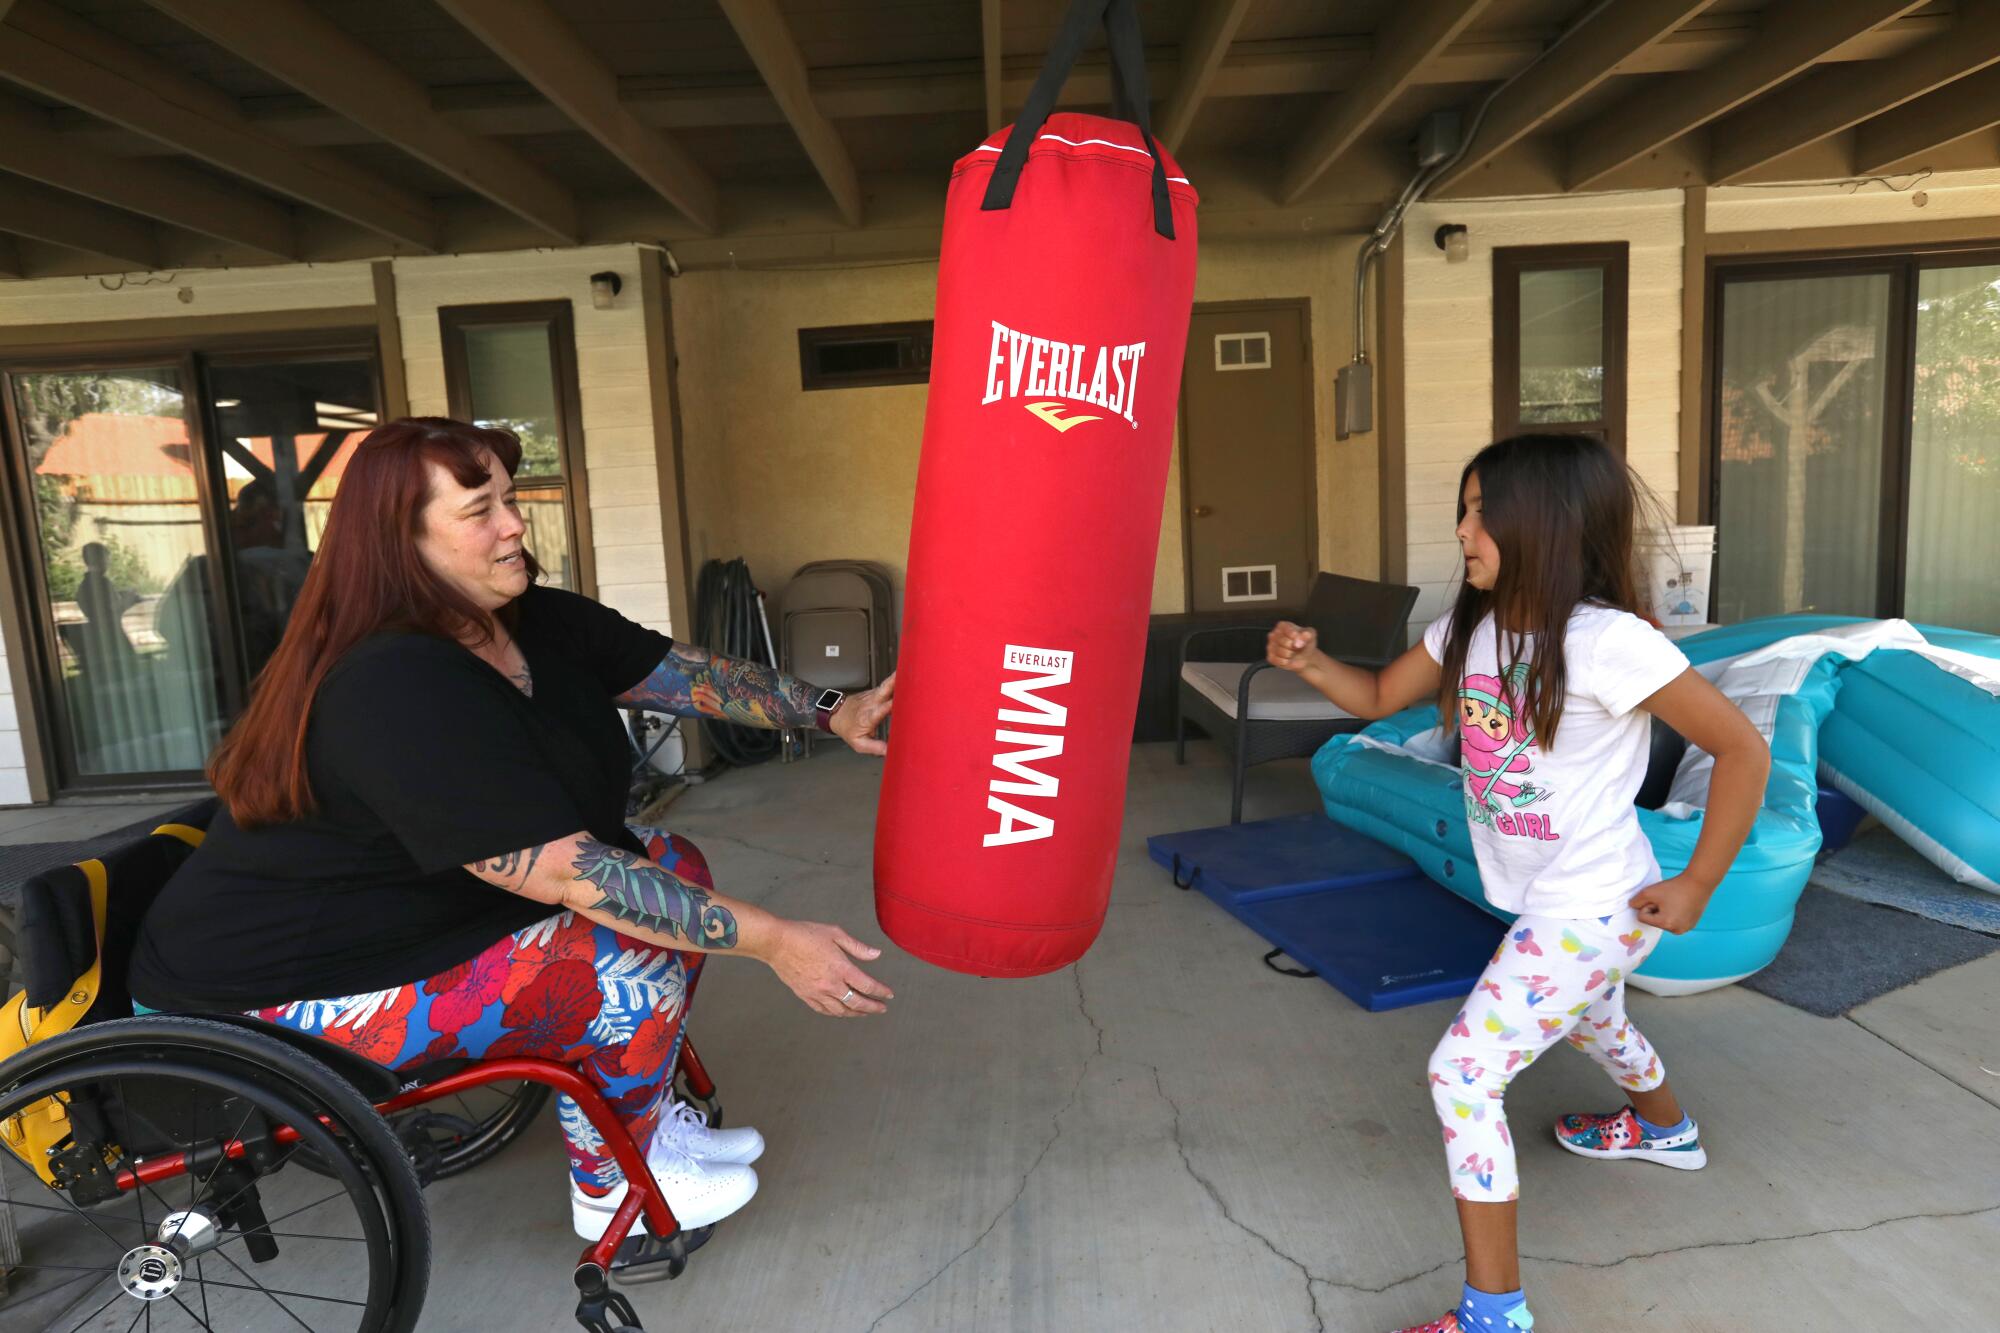 A woman sits in a wheelchair and holds a punching bag as she play with a young girl